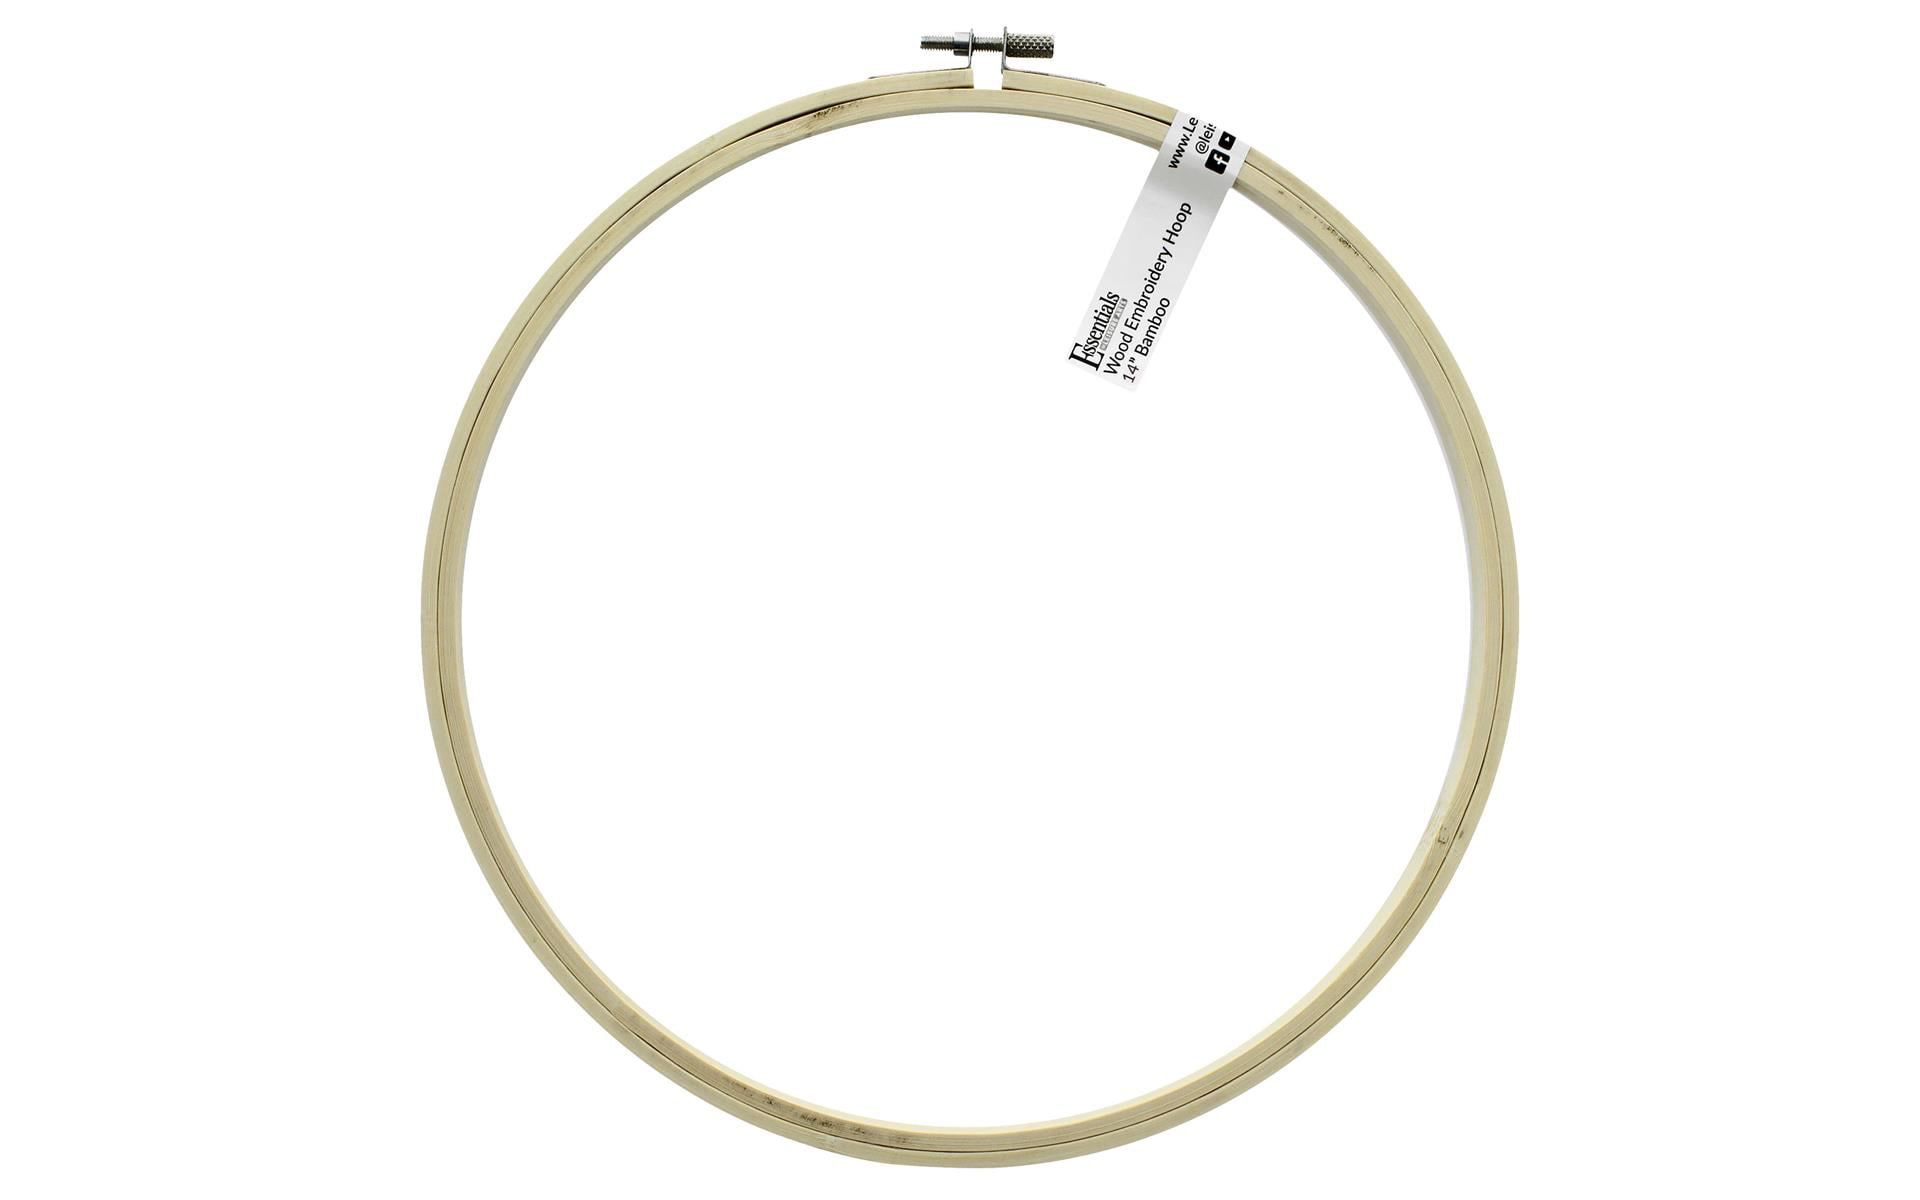 Oval Embroidery Hoop with Imitated Wood Display Frame Look, X-Small Premium Quality